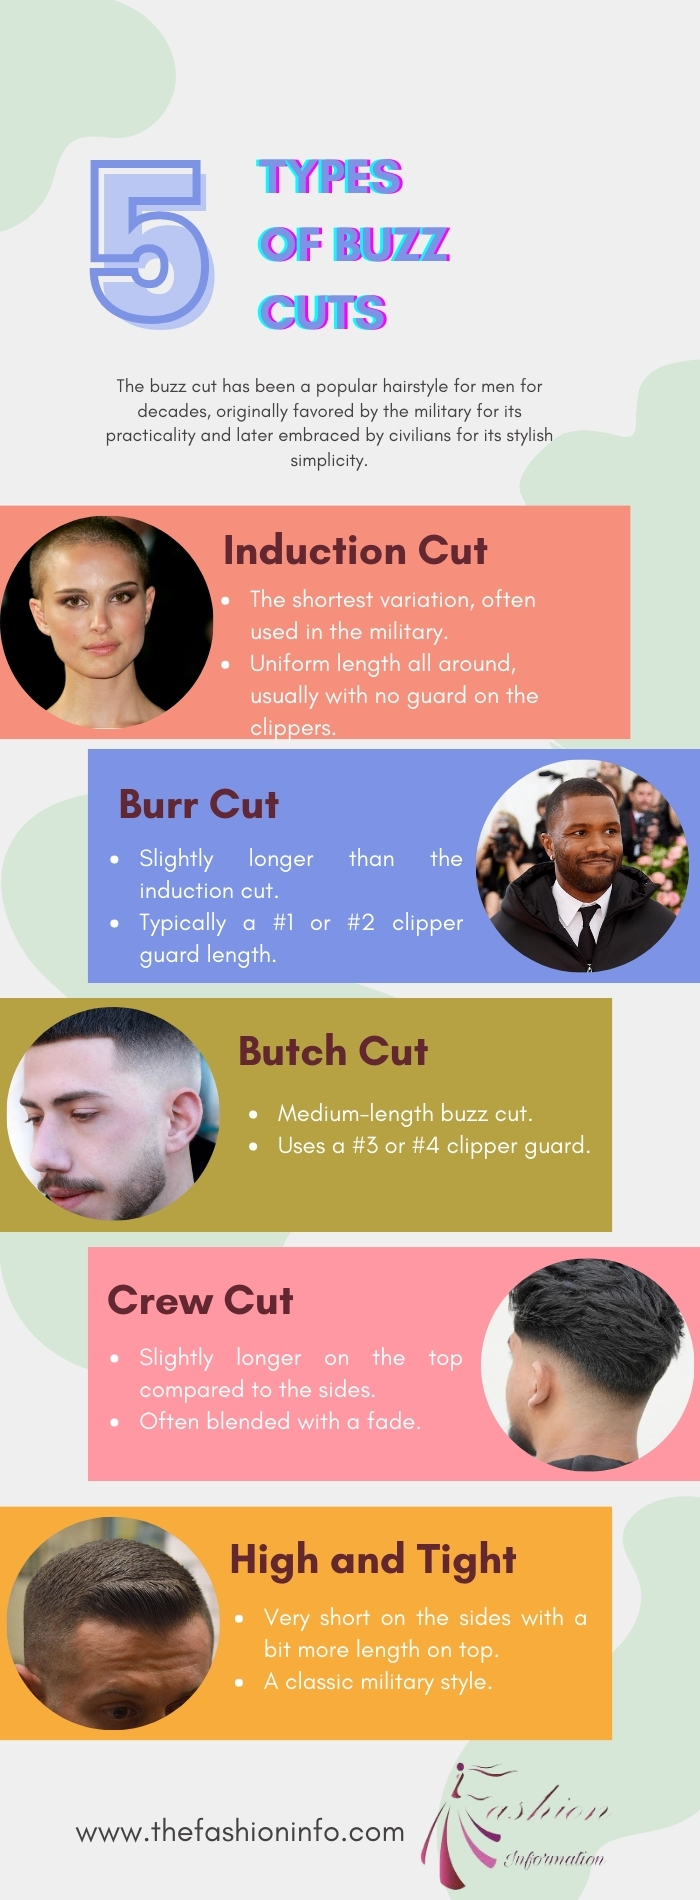 5 Types of Buzz Cuts